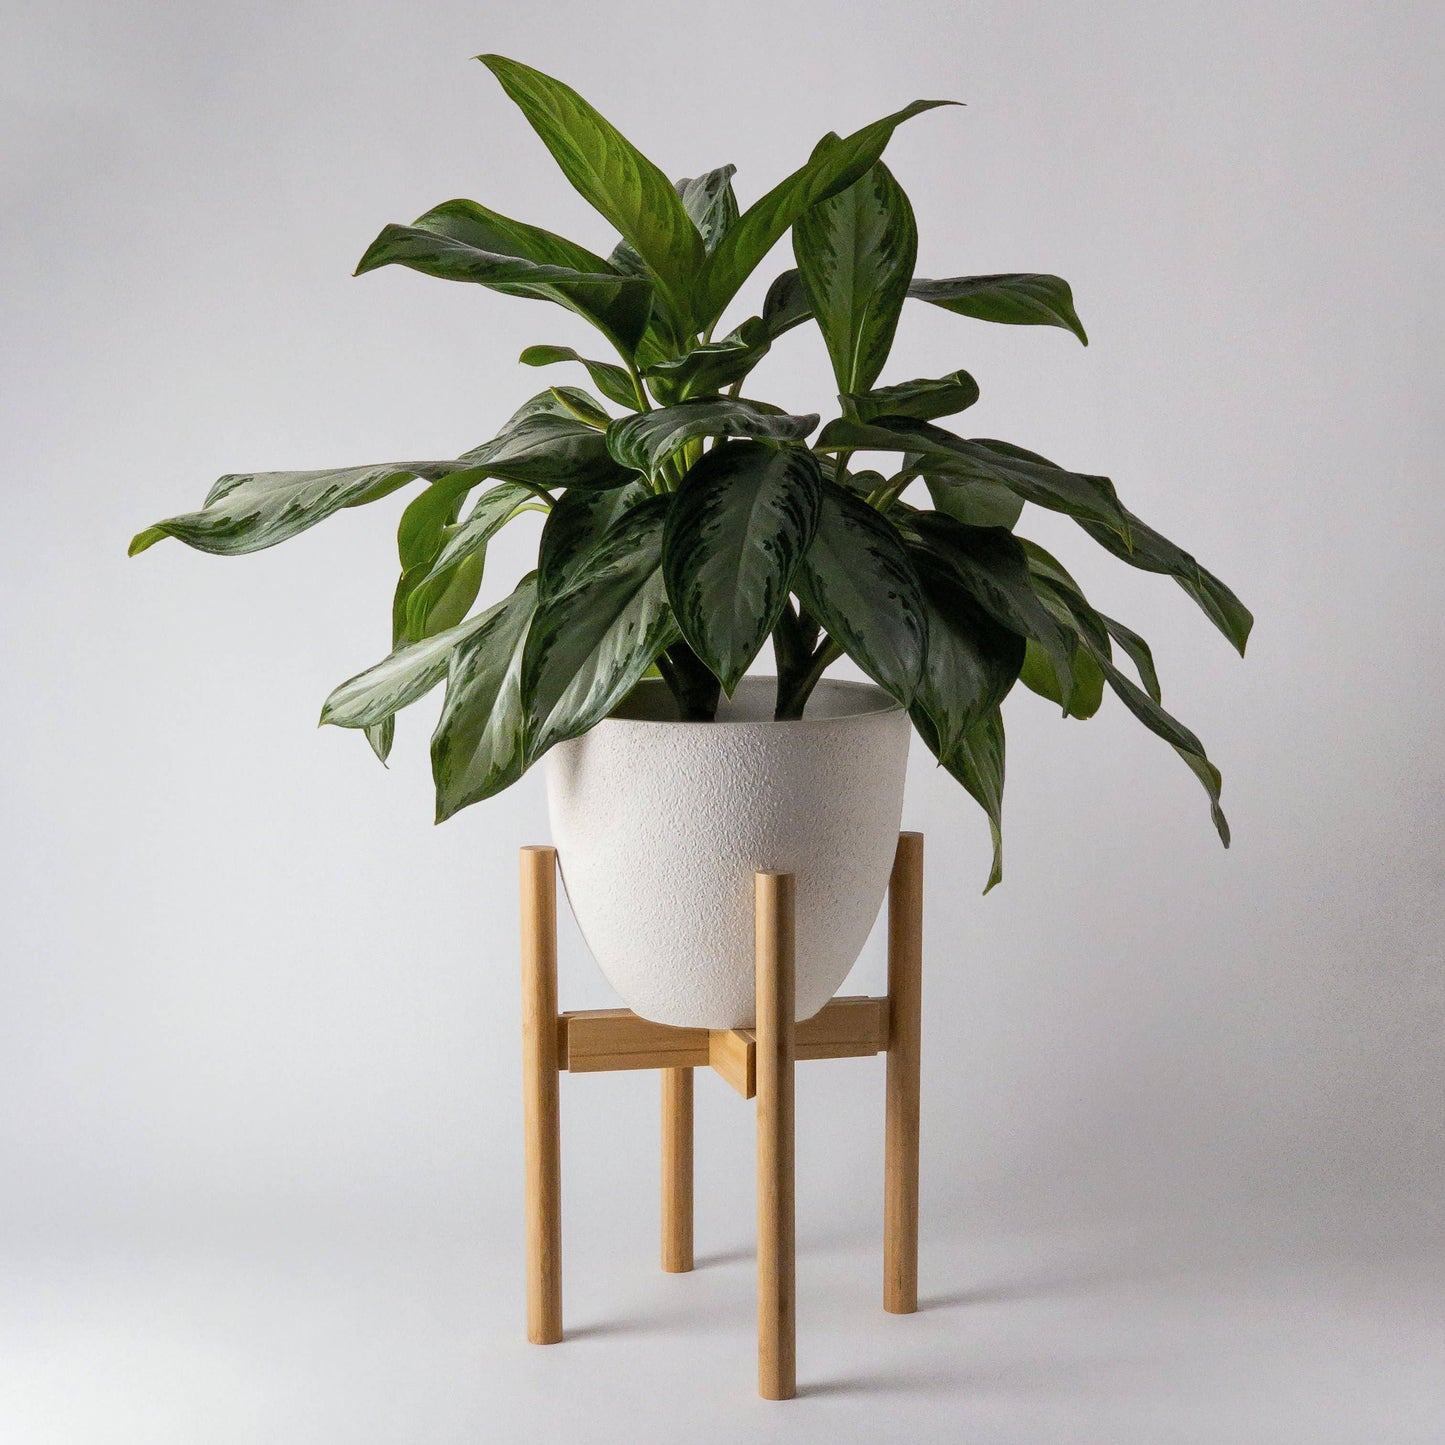 Kanso - Adjustable Bamboo Plant Stand